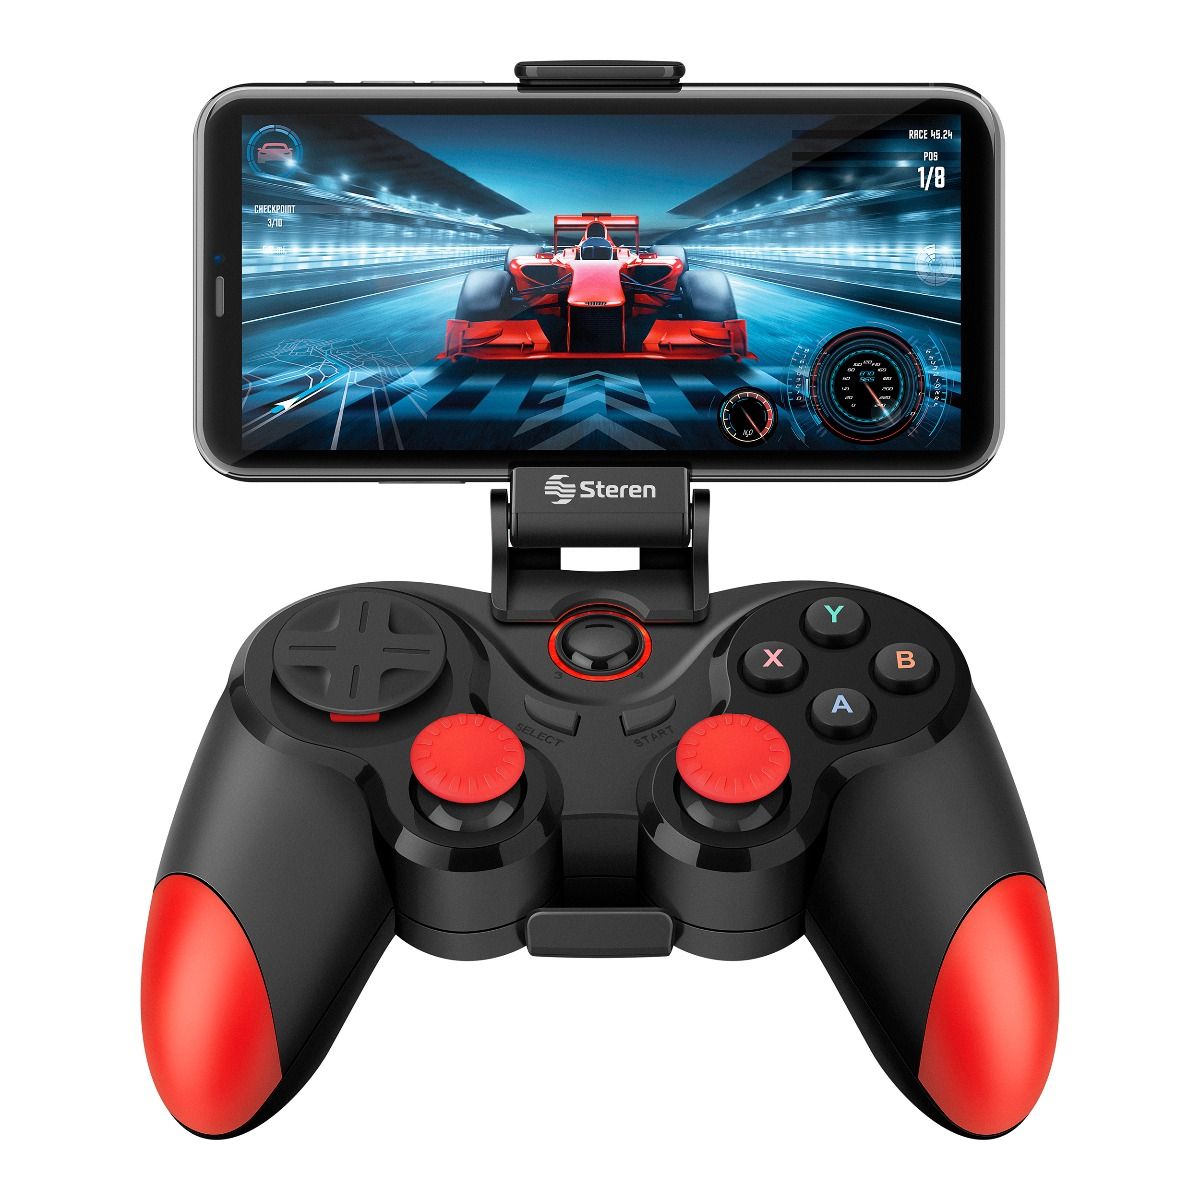 Gamepad Bluetooth extensible, con stand central, para Smartphones, Tablets  y PC